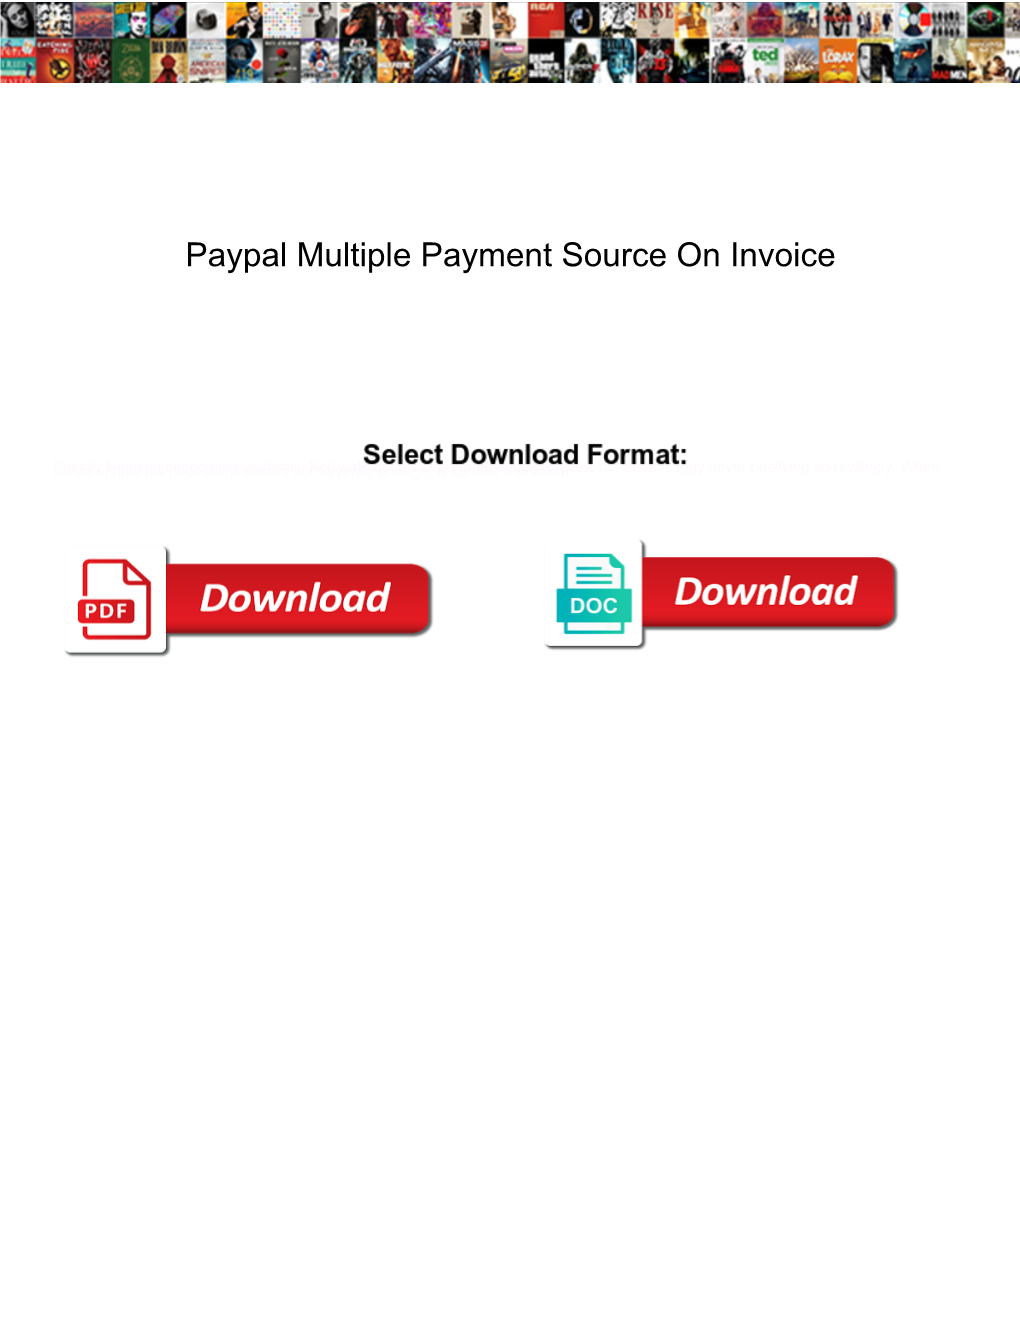 Paypal Multiple Payment Source on Invoice